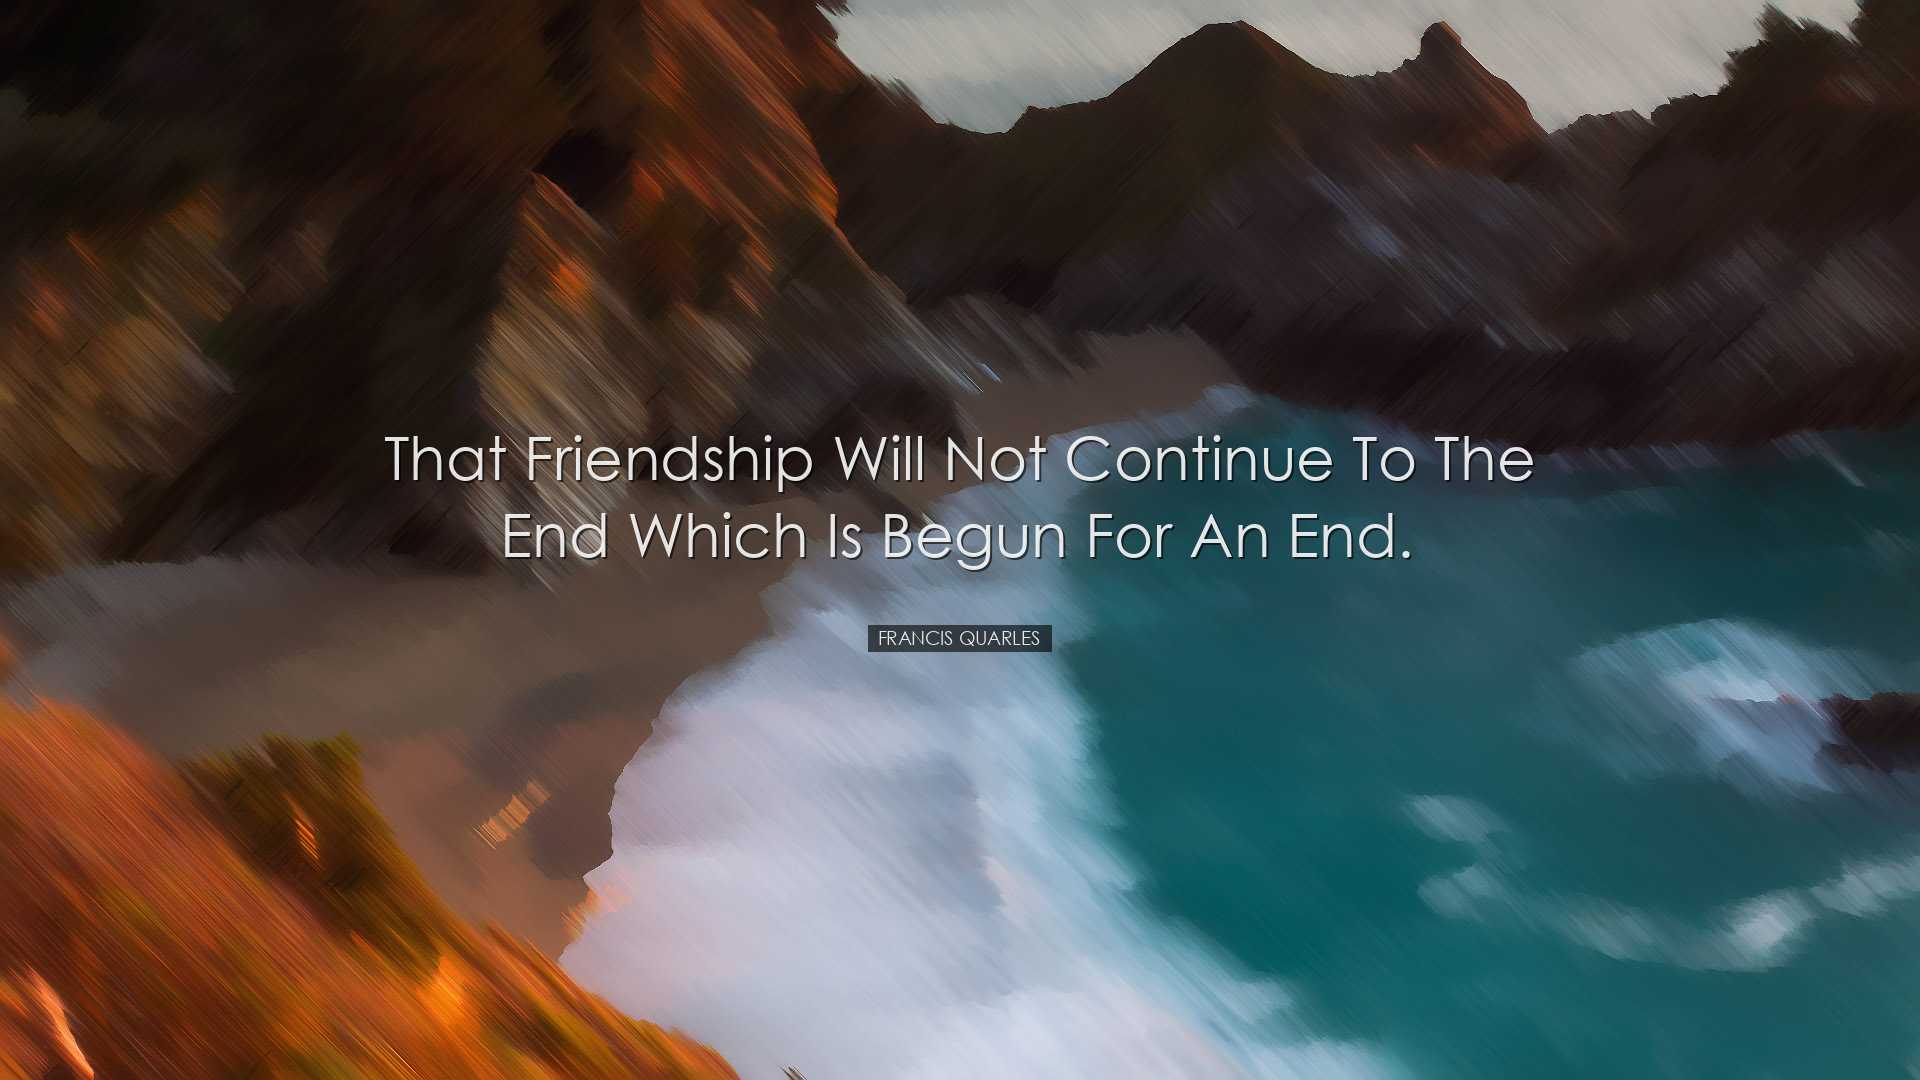 That friendship will not continue to the end which is begun for an